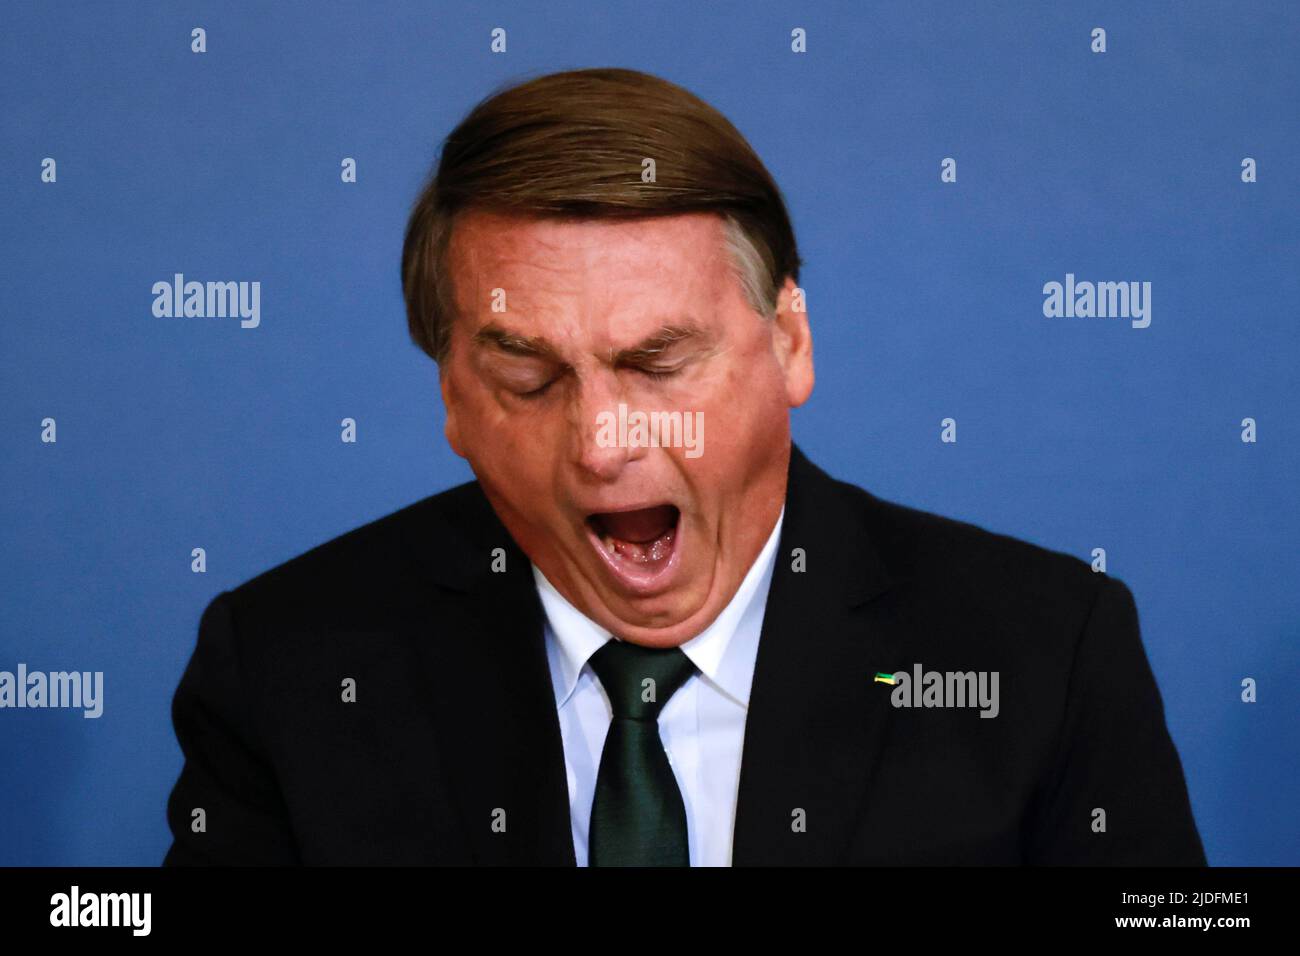 Brazil's President Jair Bolsonaro yawns during a ceremony about the National Policy for Education at the Planalto Palace in Brasilia, Brazil June 20, 2022. REUTERS/Ueslei Marcelino Stock Photo